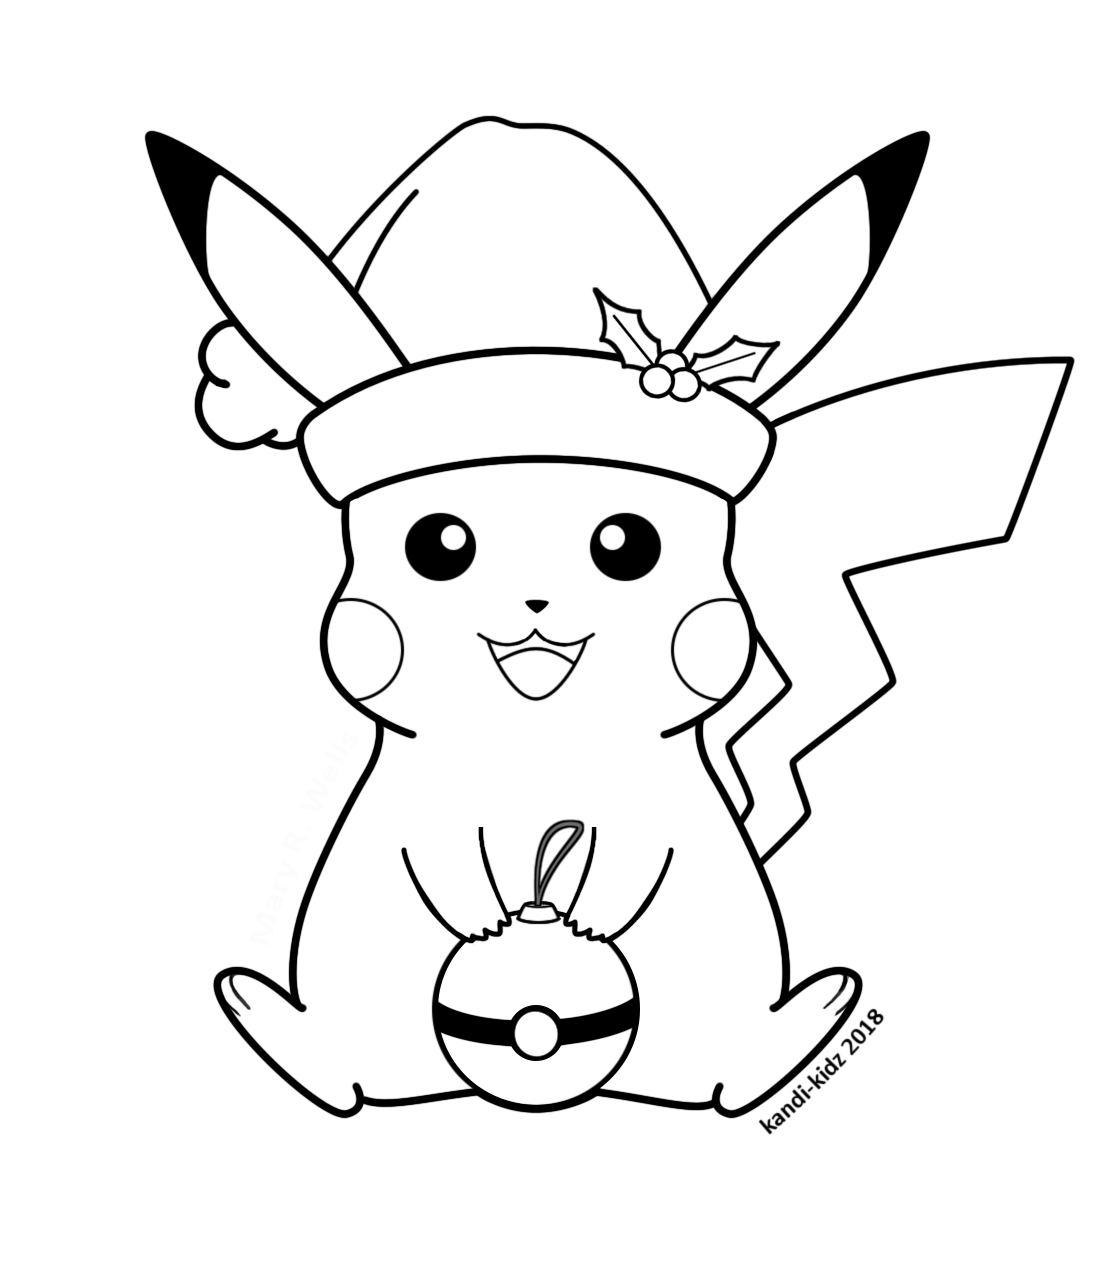 pikachu-christmas-coloring-pages-brengosfilmitali